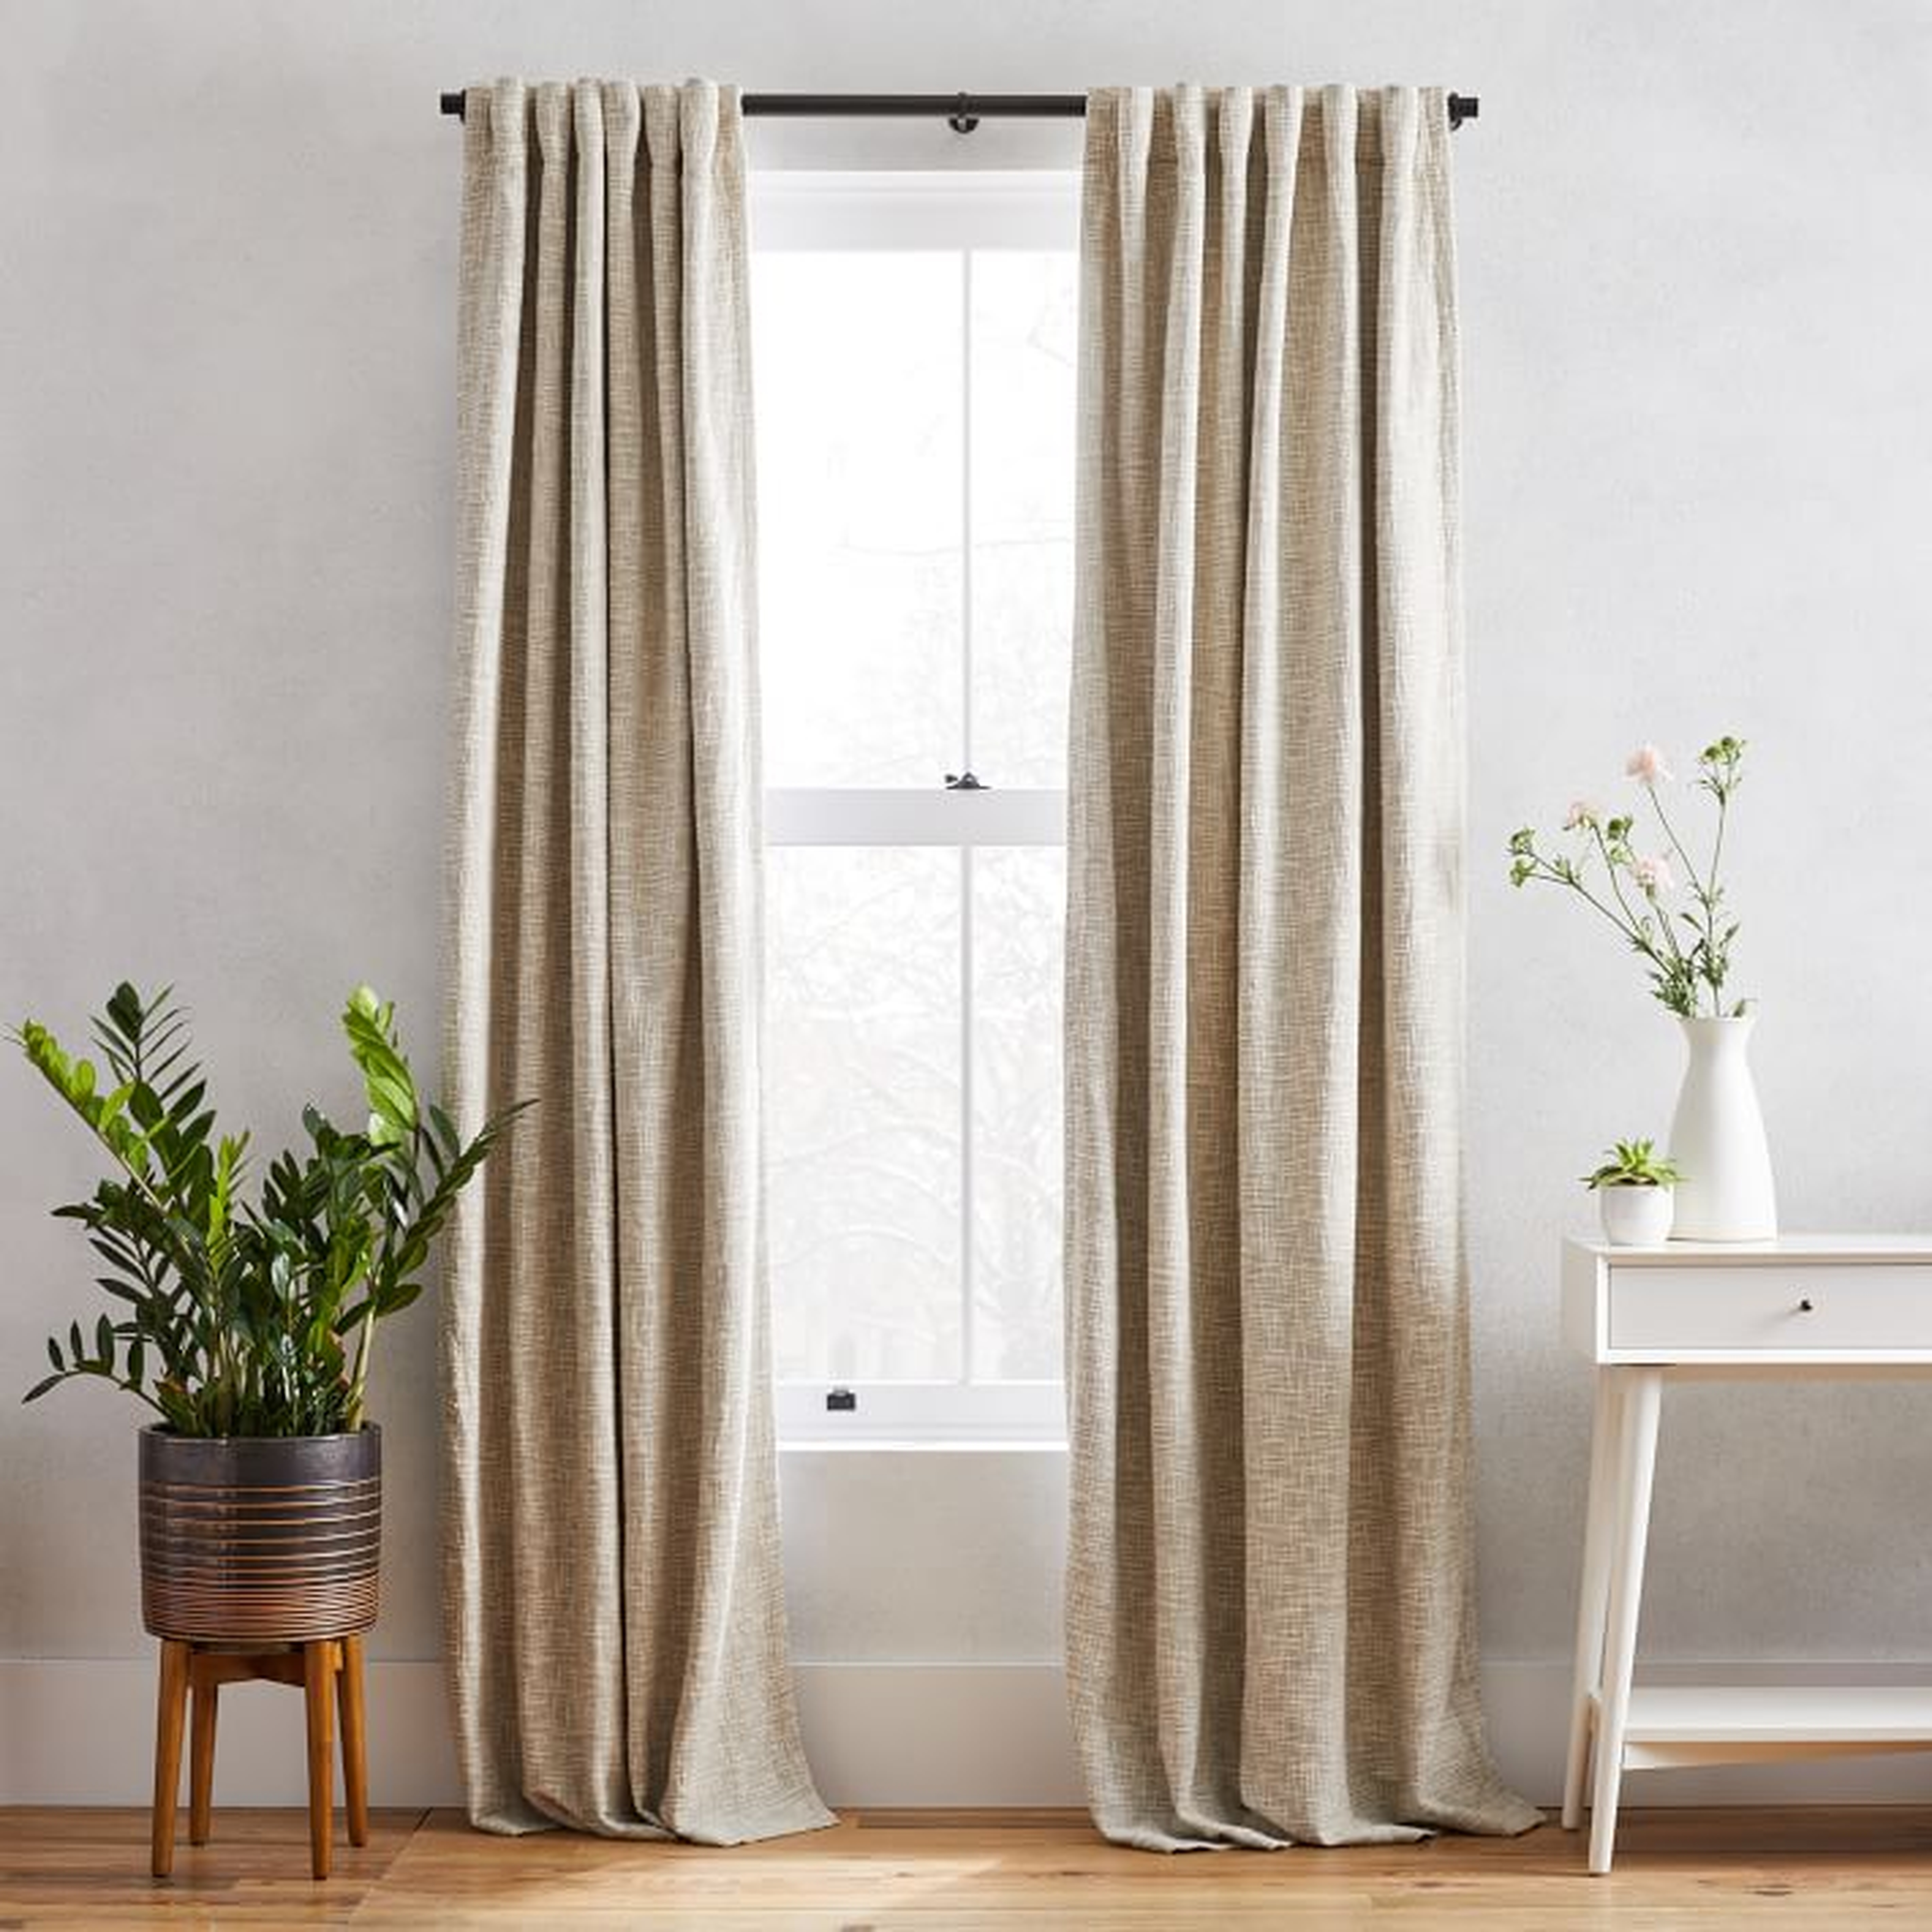 Textured Weave Curtain + Blackout Lining - Ivory - 96" - SINGLE PANEL - West Elm